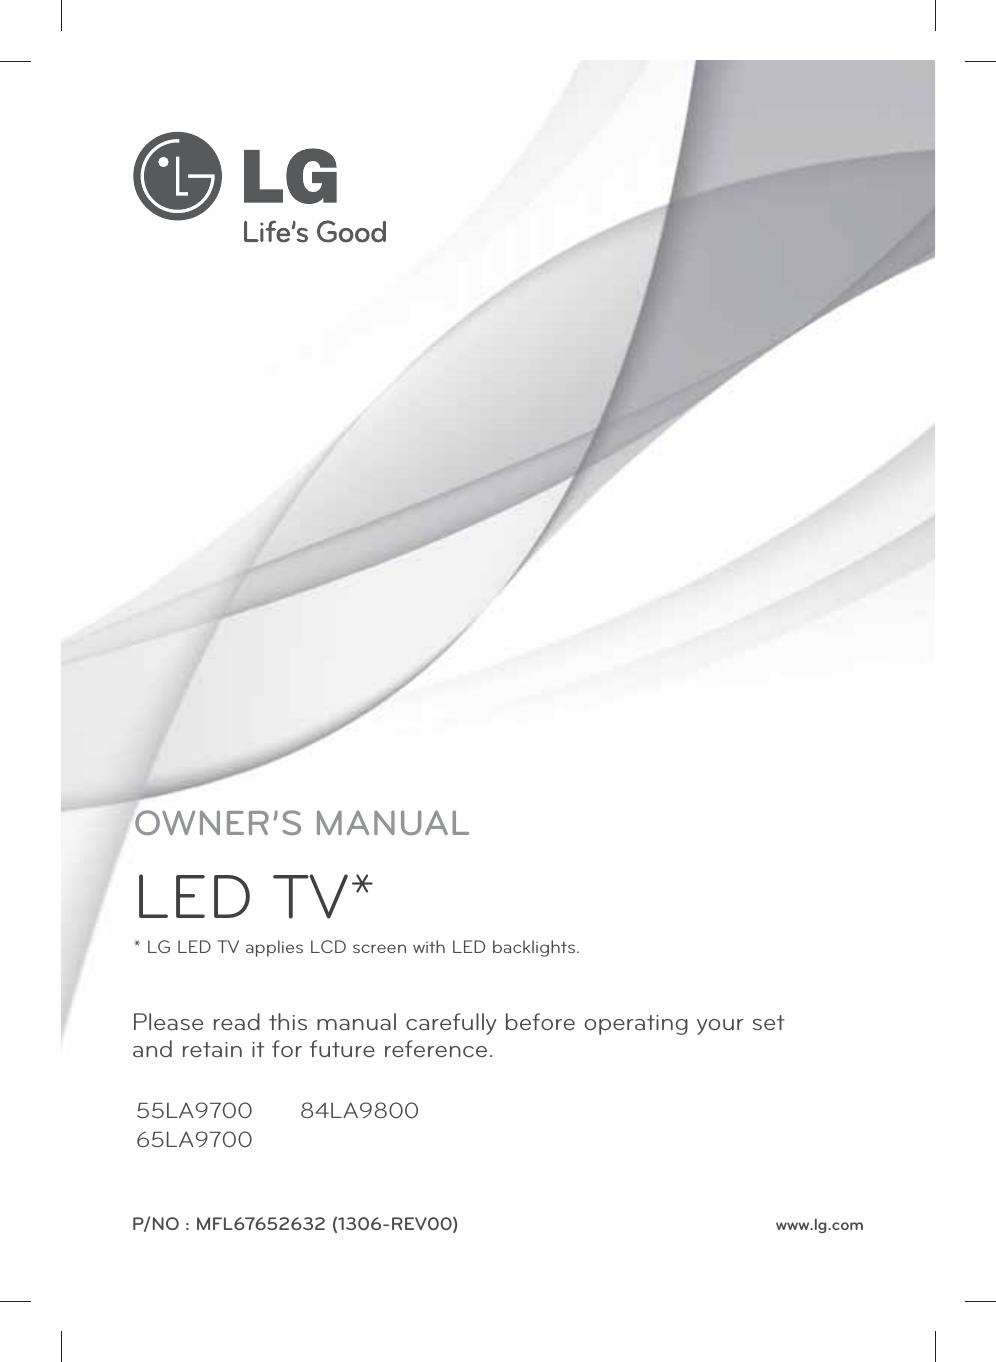 www.lg.comPlease read this manual carefully before operating your set and retain it for future reference.OWNER’S MANUALLED TV** LG LED TV applies LCD screen with LED backlights.55LA970065LA970084LA9800P/NO : MFL67652632 (1306-REV00)